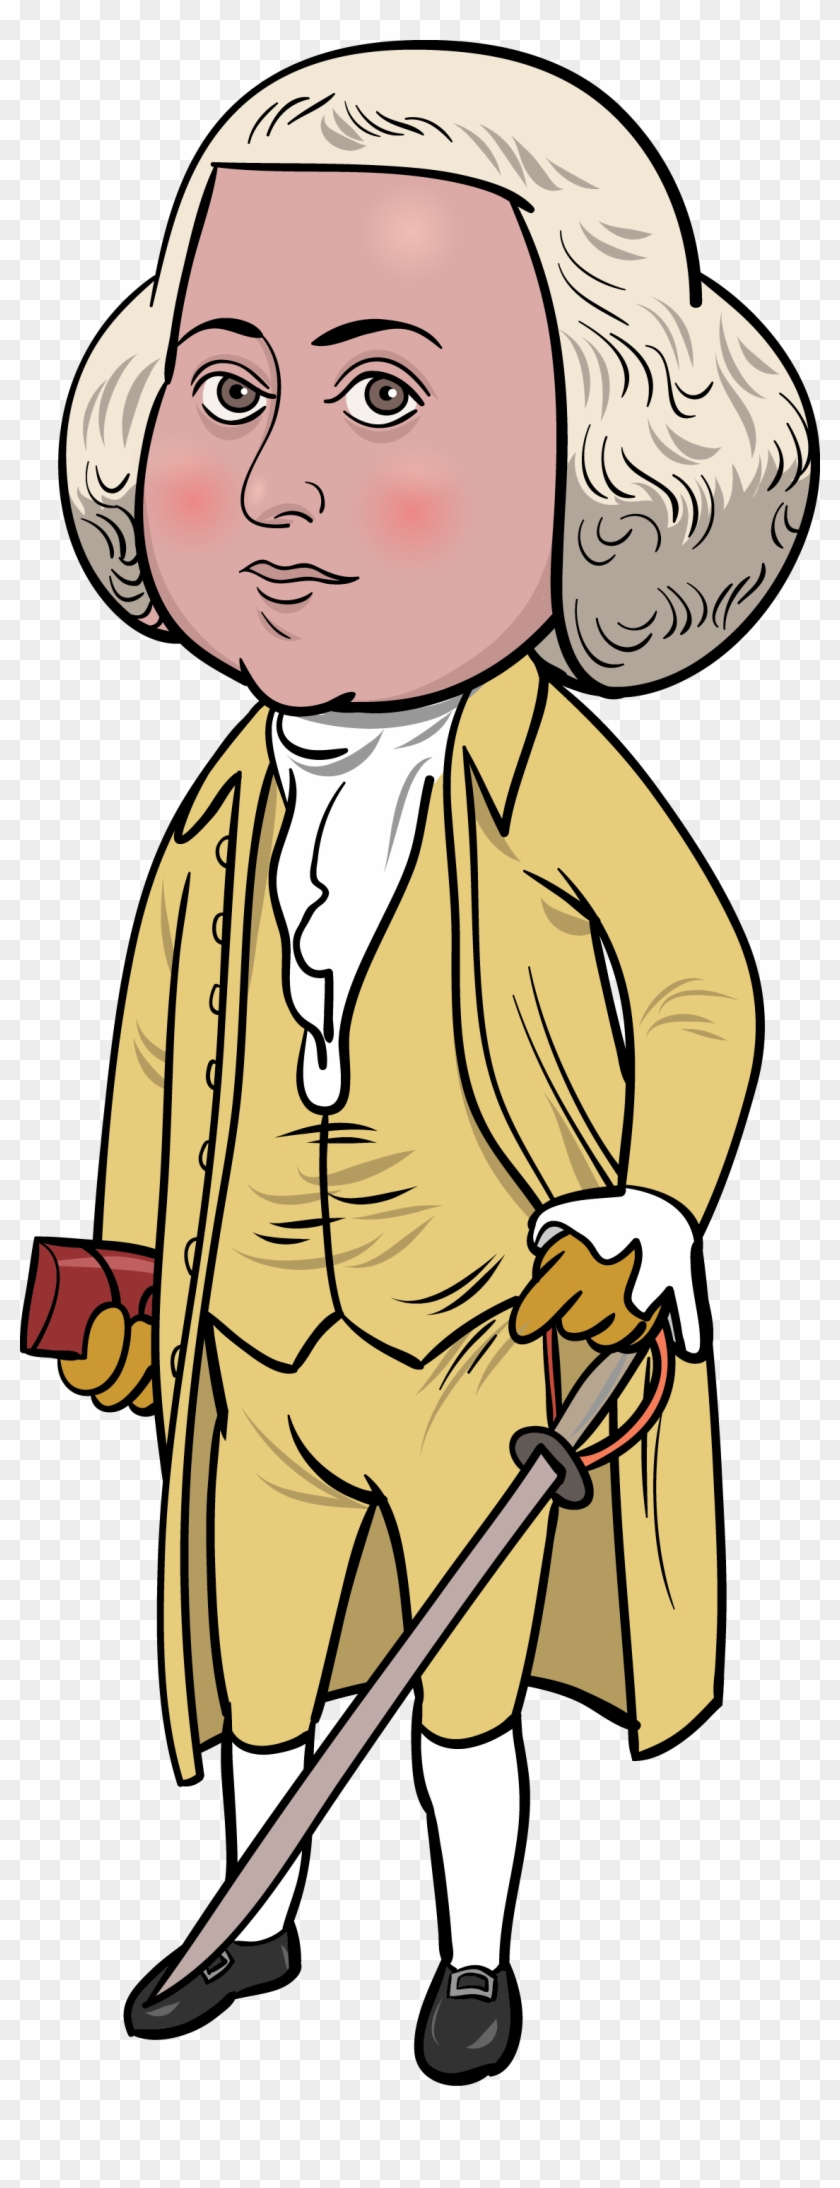 Picture Royalty Free Stock Working For Thus We Have - Cartoon Picture Of John Adams Clipart #415767